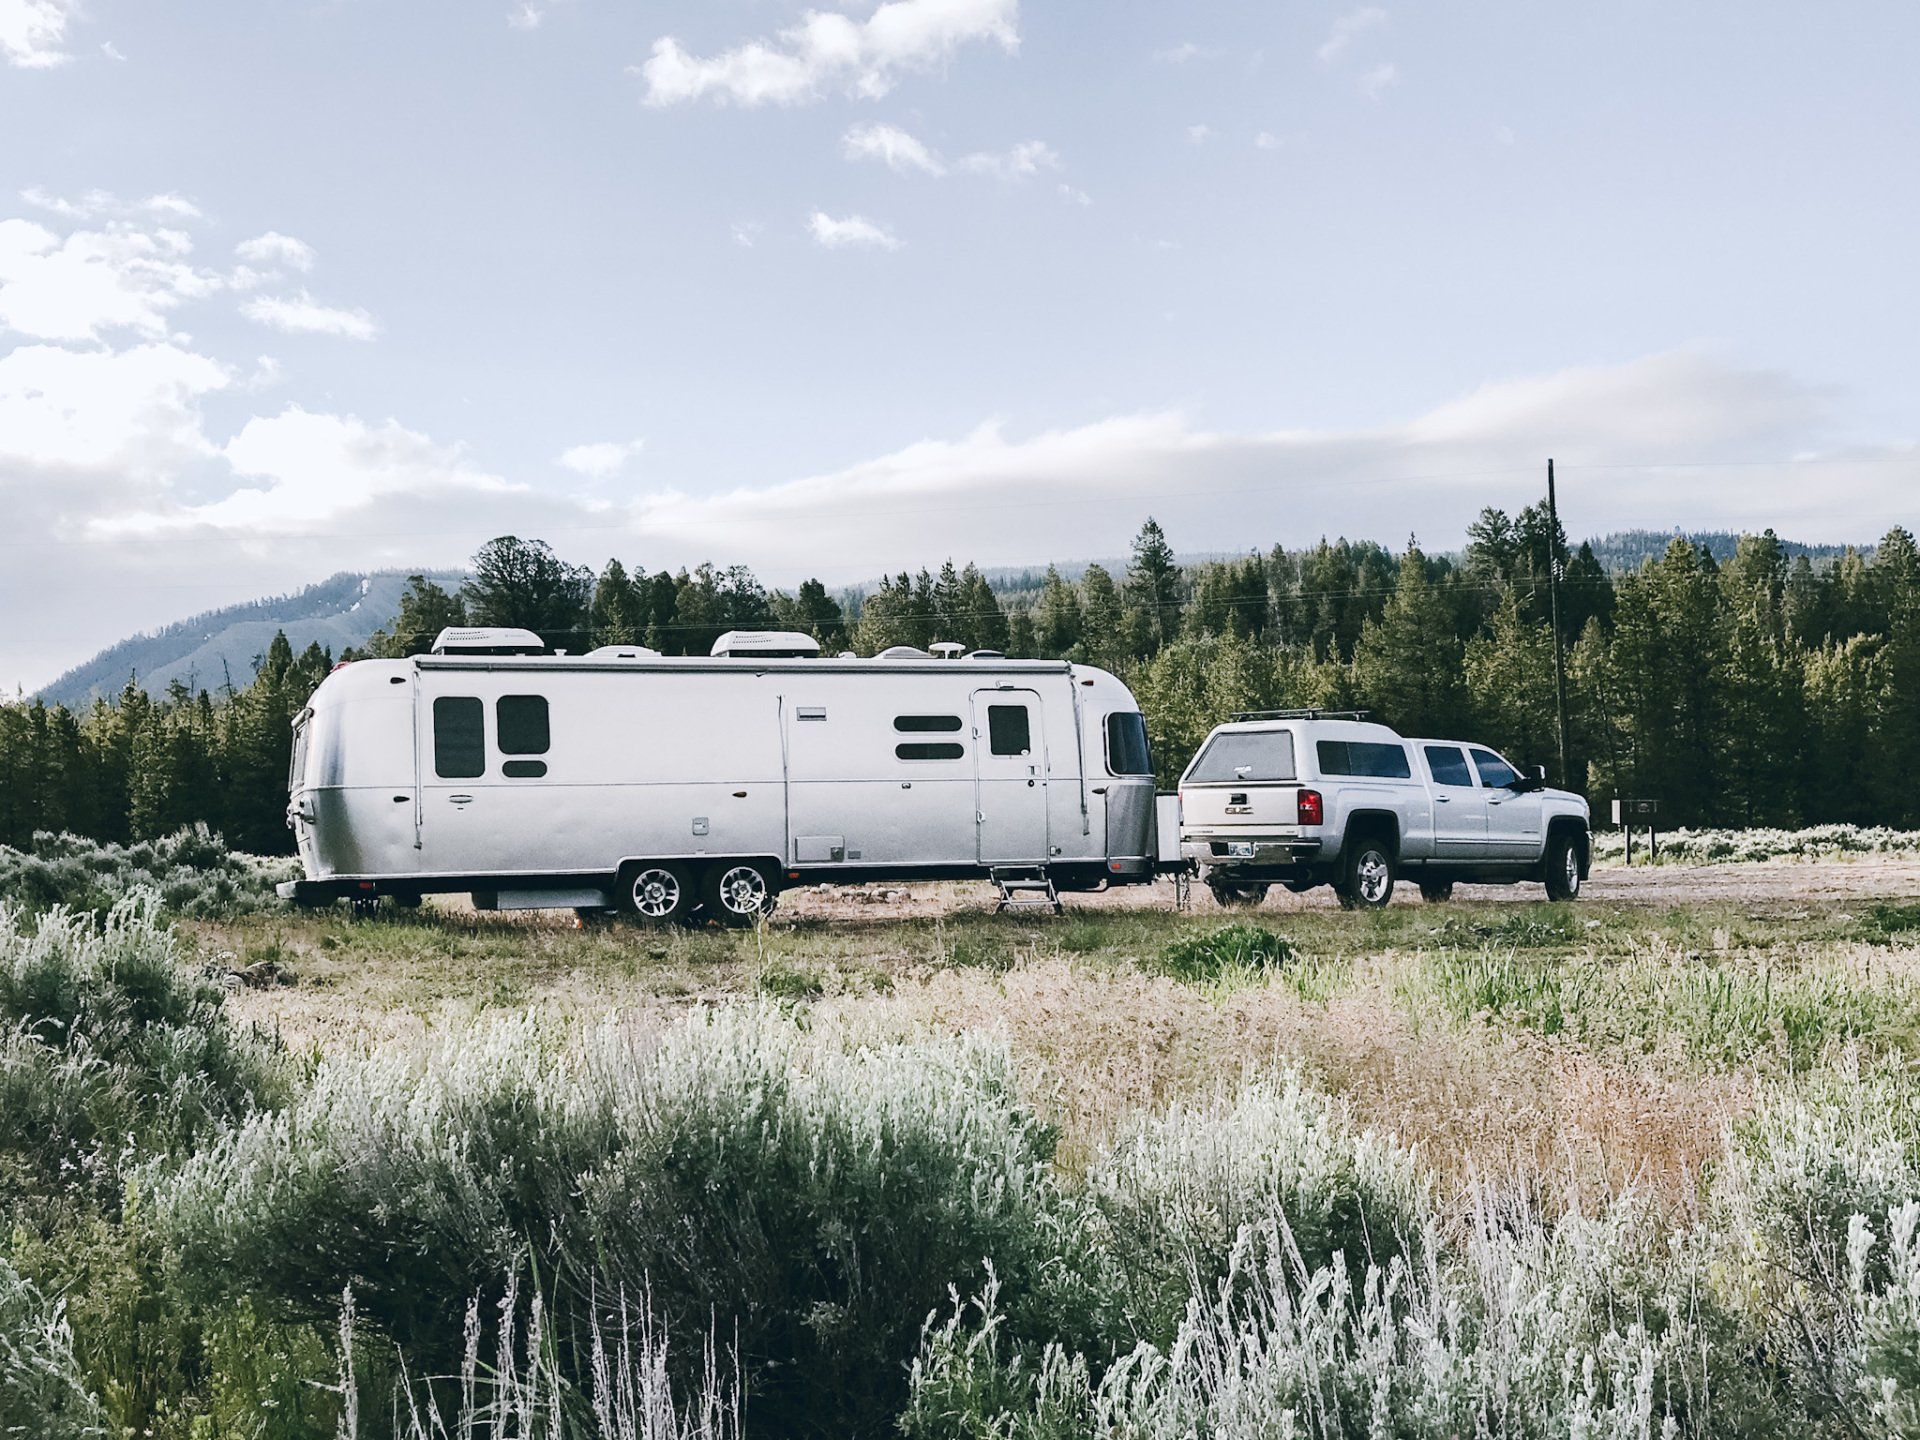 Full Time RV Living in an Airstream travel trailer free camping at Grand Teton National Park